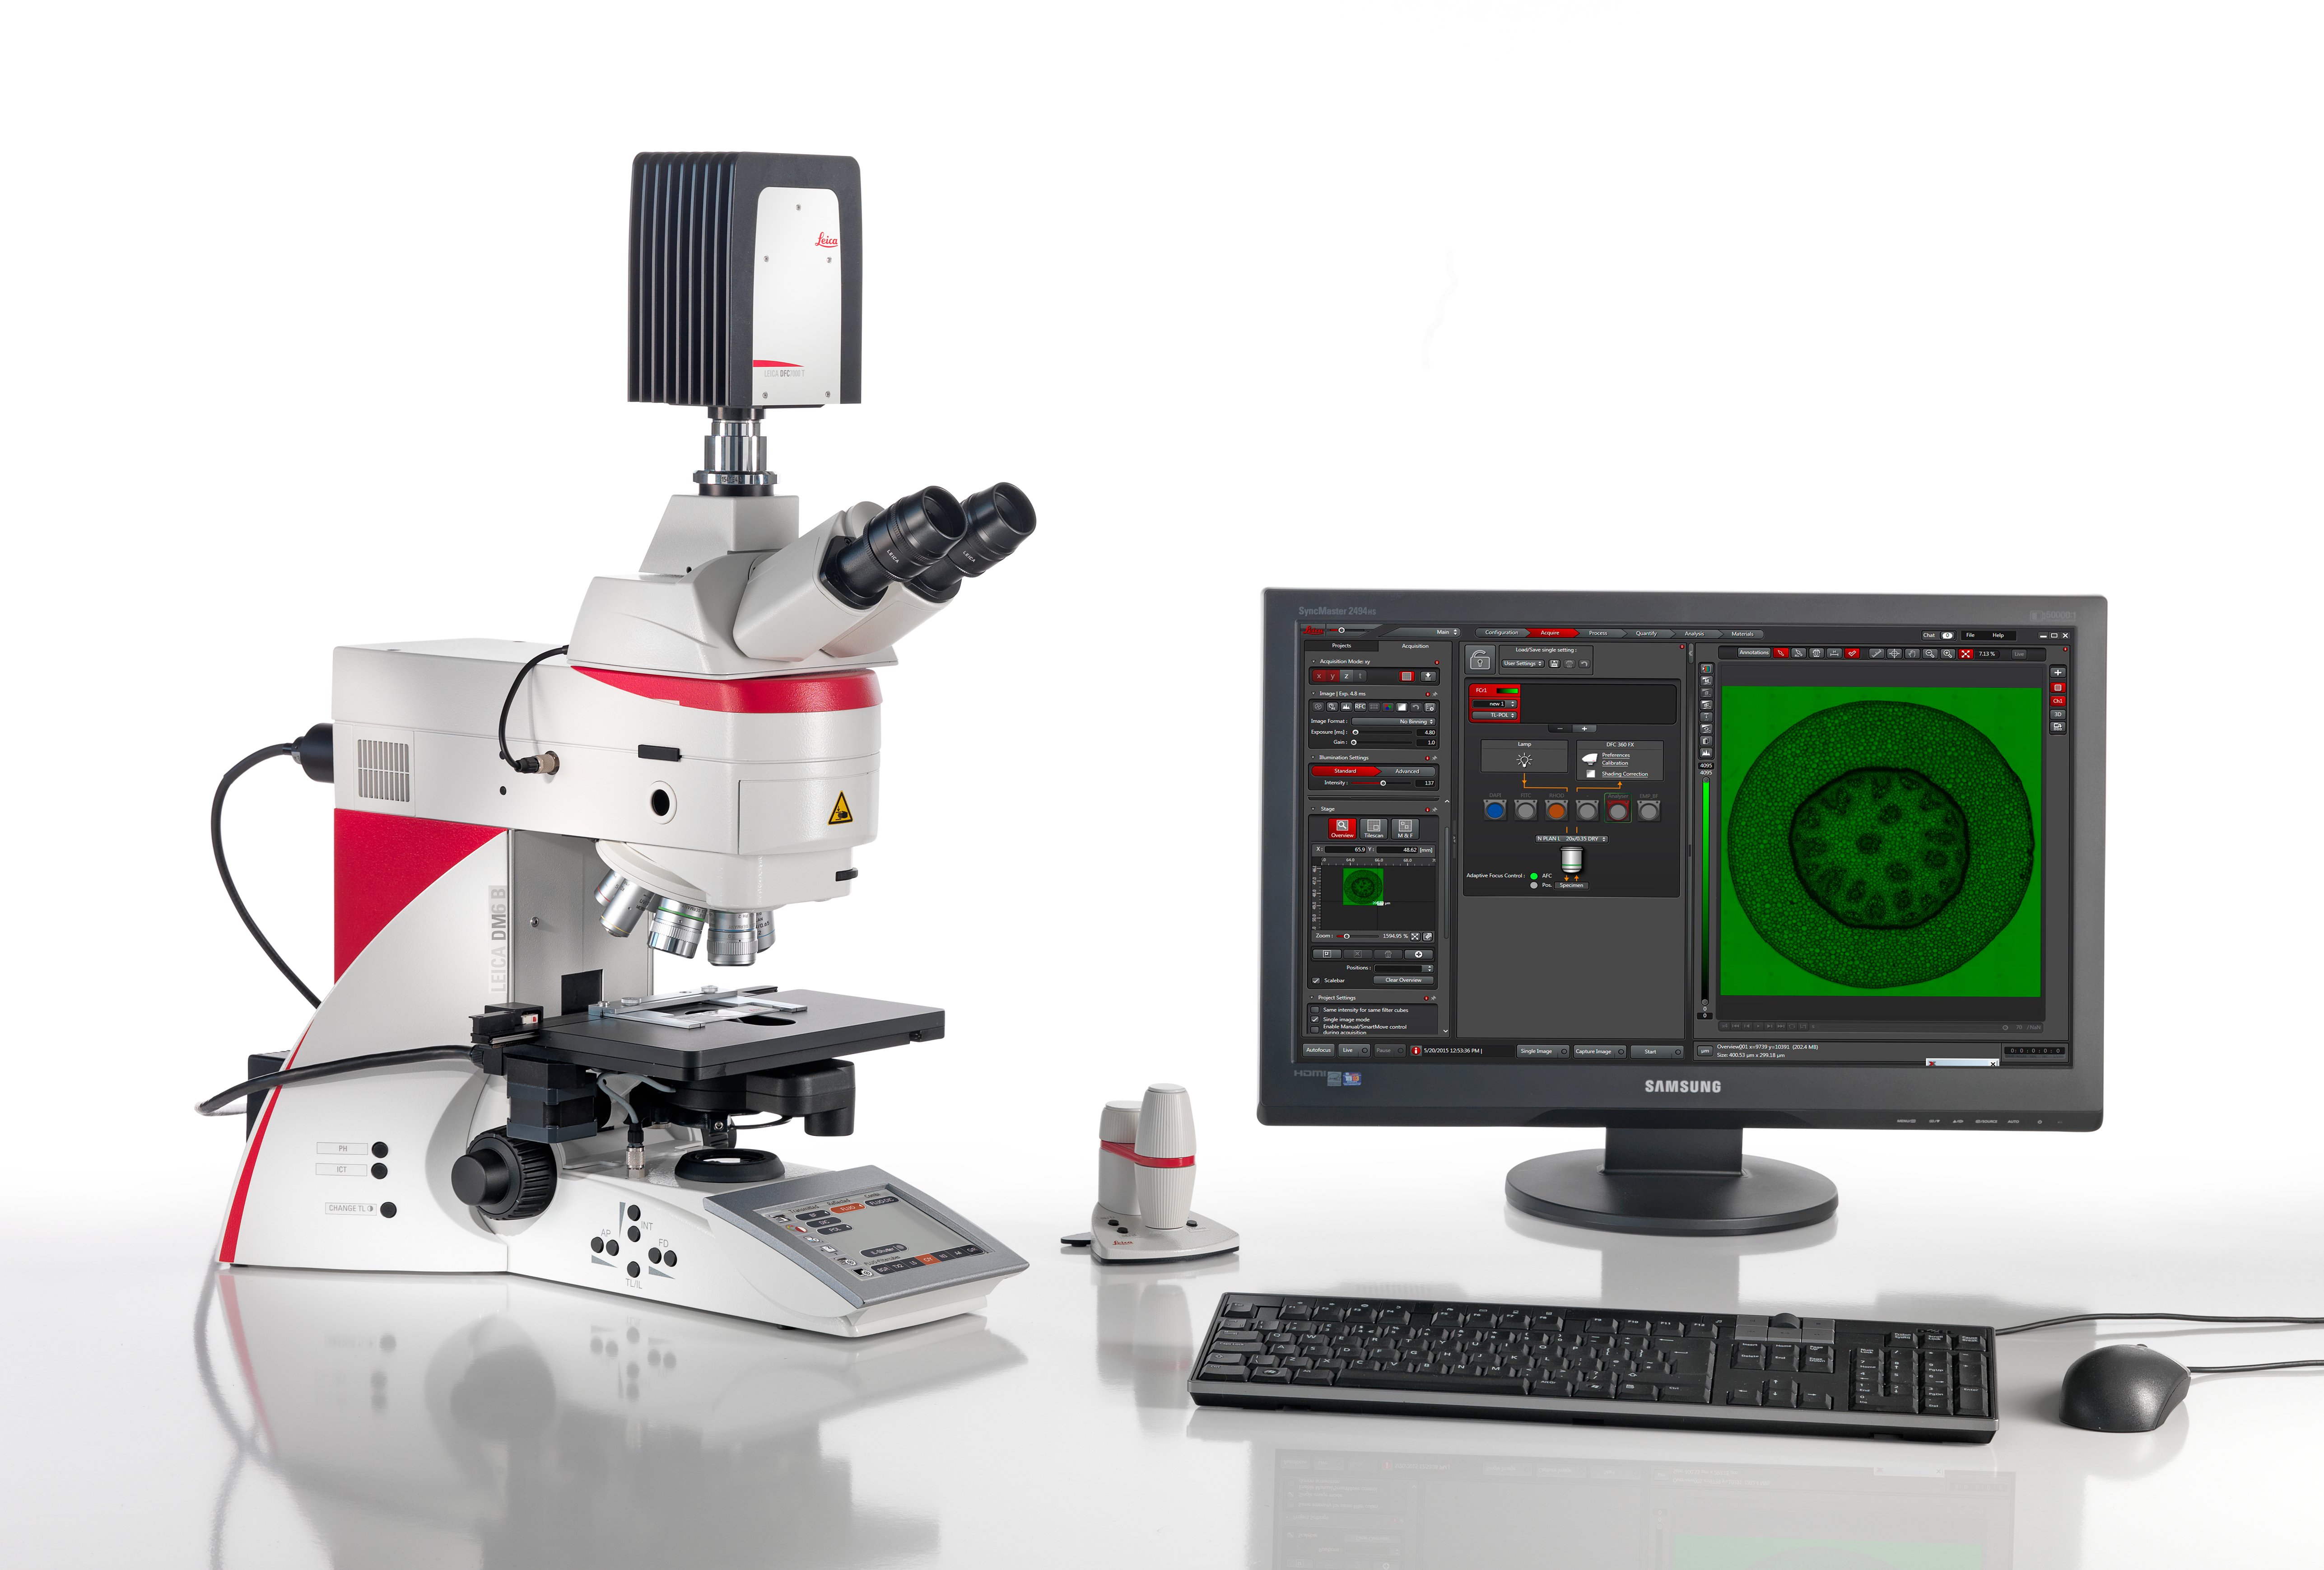 The Leica LAS X Widefield System performs workflow-guided advanced image analysis and includes a full range of image enhancement tools.